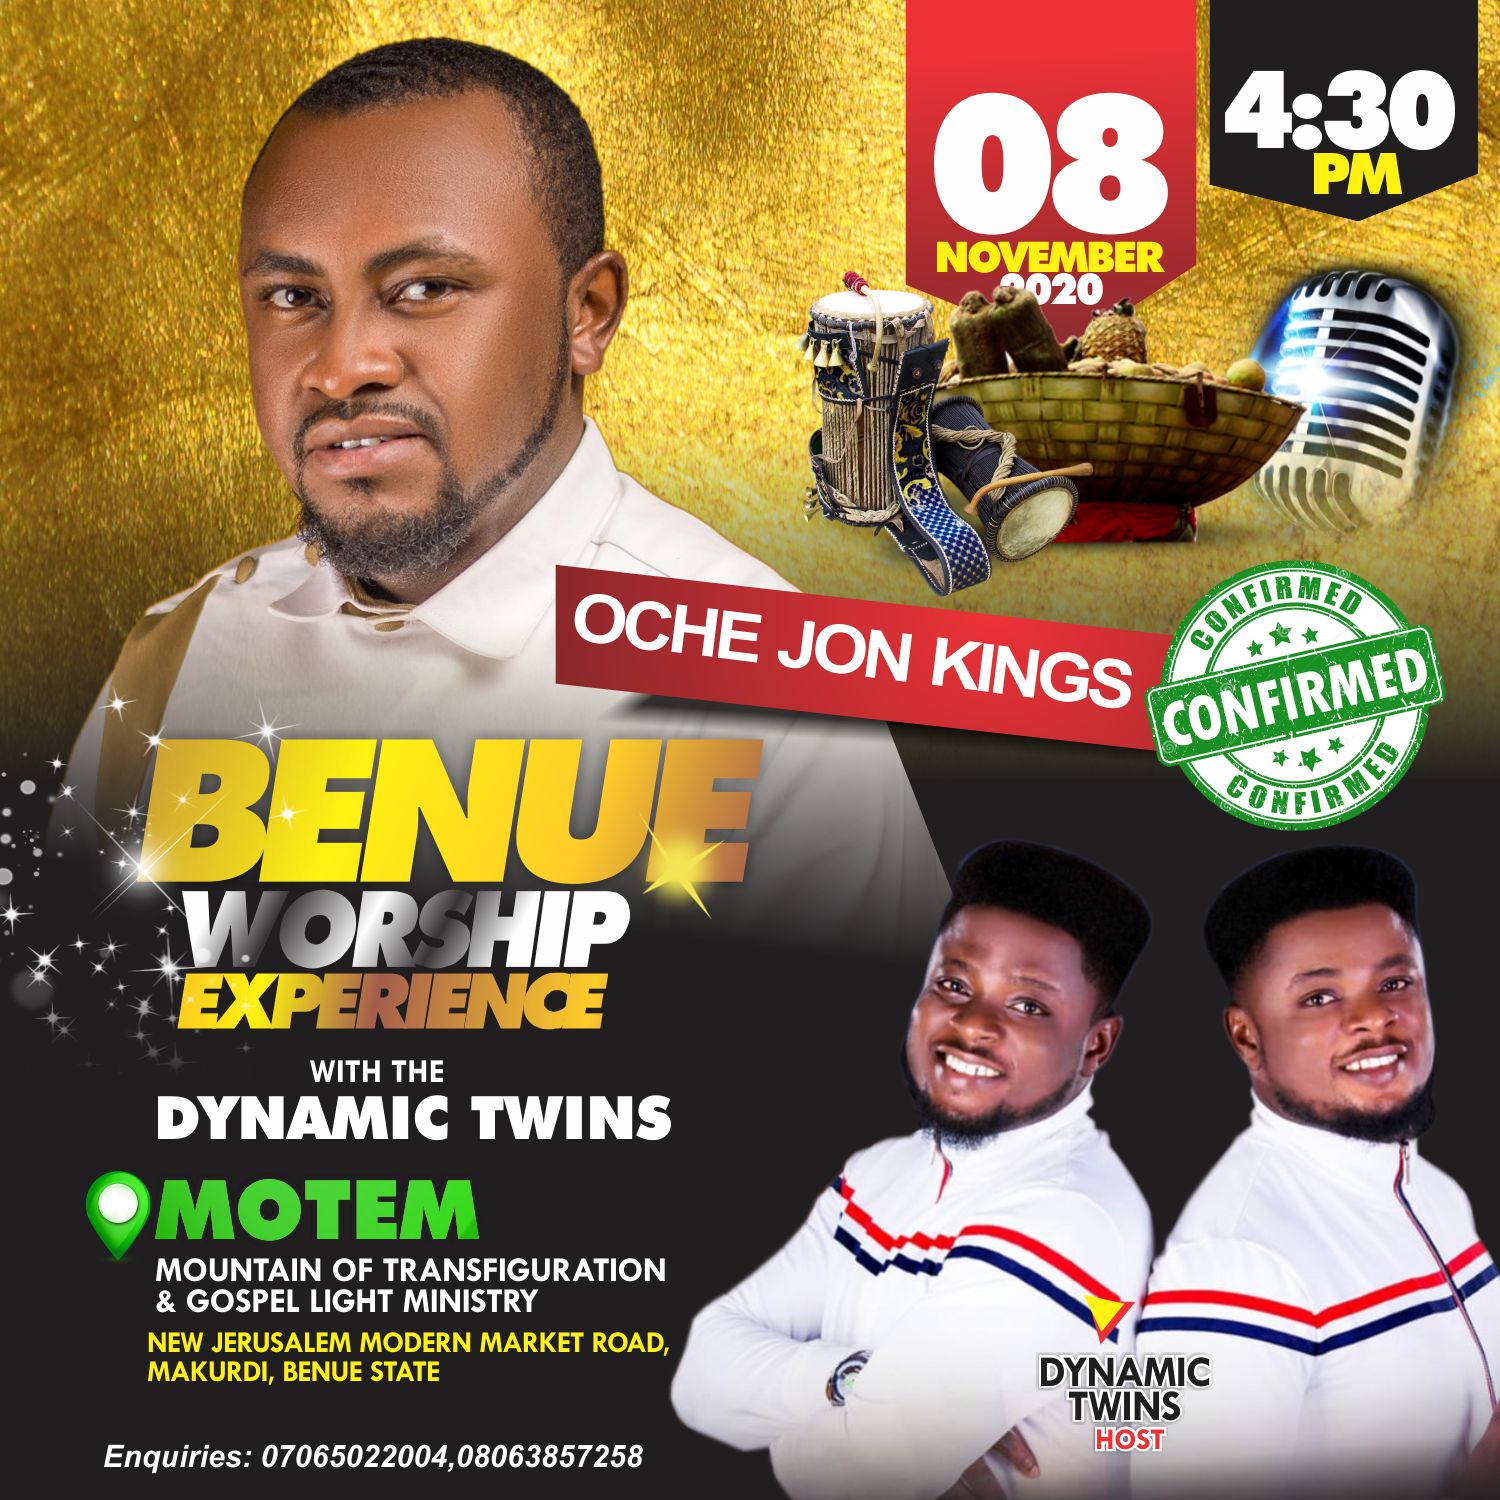 History about to be created with Benue worship experience with Dynamic Twins featuring Chris Morgan, Oche Jon kings, Owie Abutu, Okopi Peterson, Dan Favour and a host of others